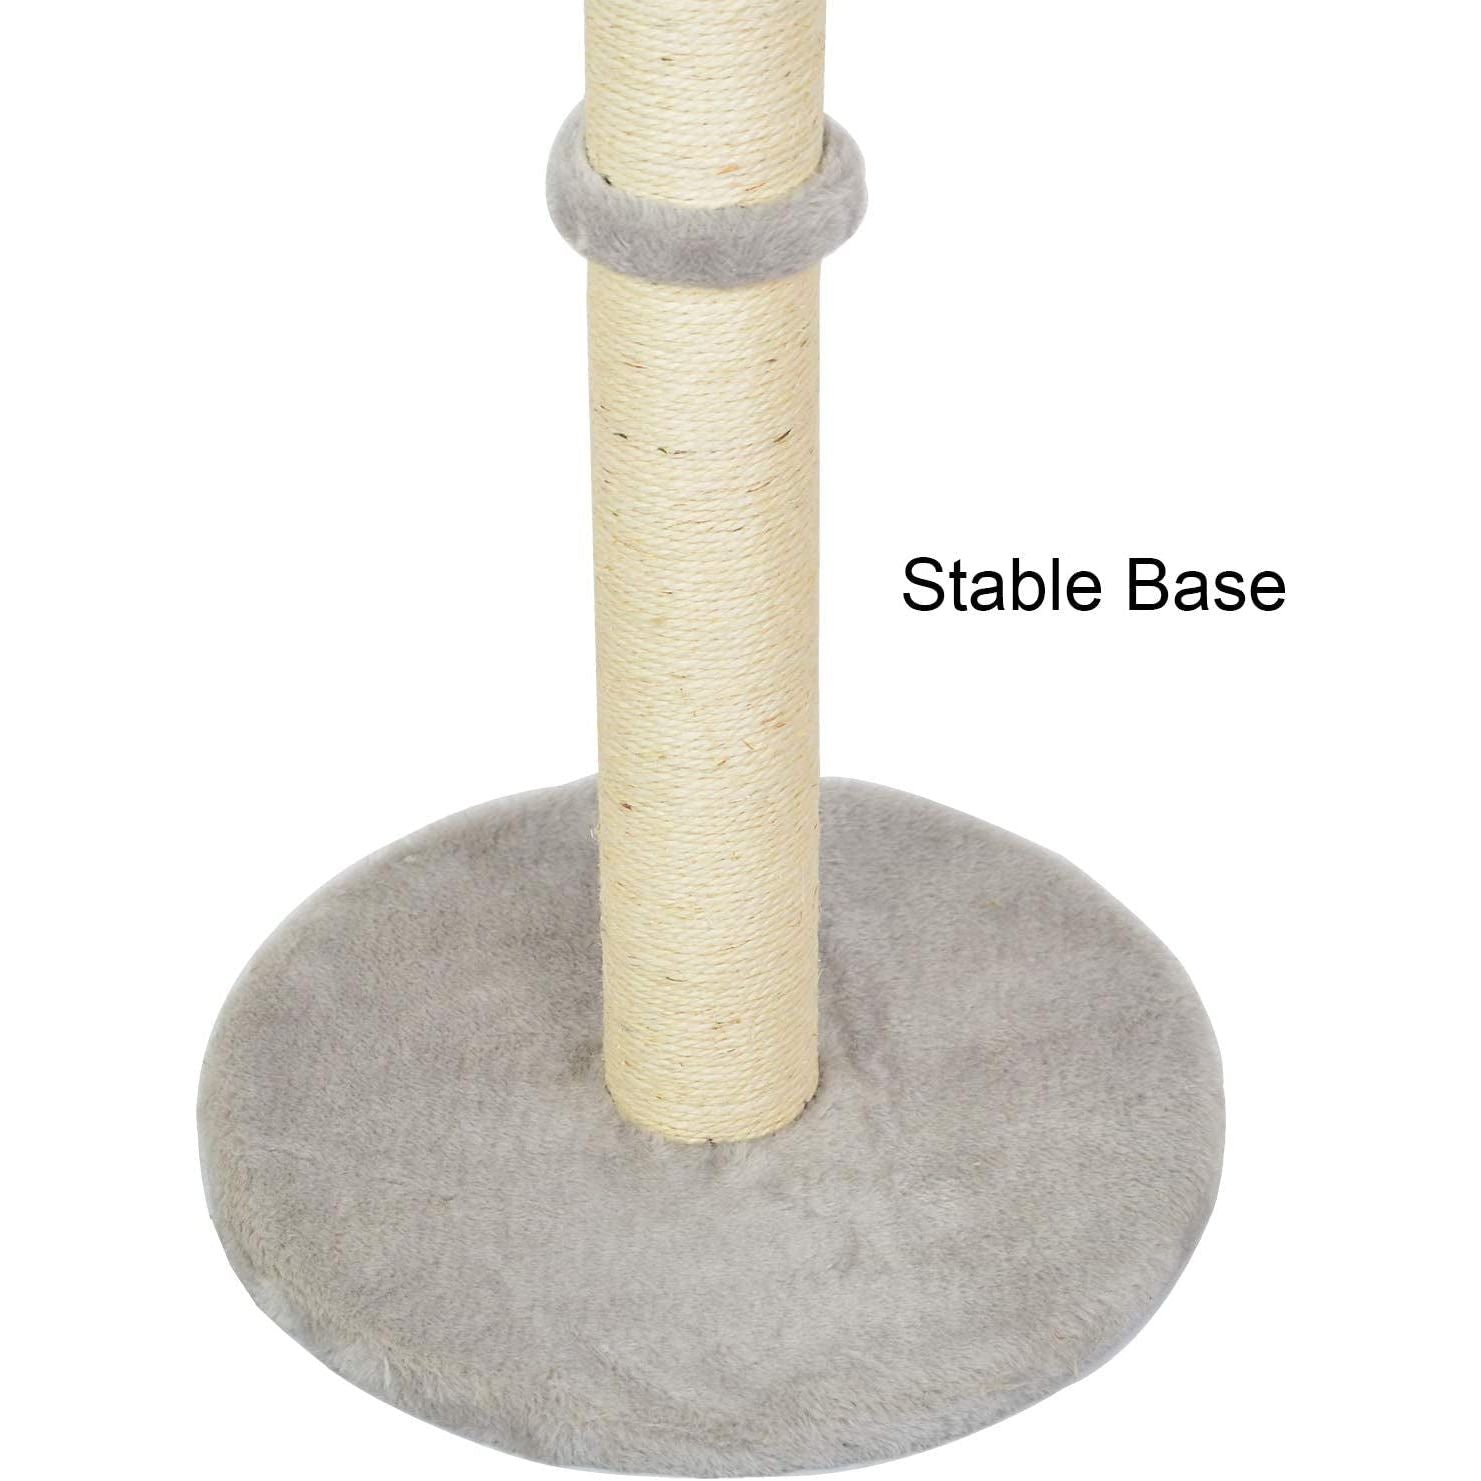 Cat Scratching Post, Indoor Cat Post with Sturdy Natural Sisal Rope